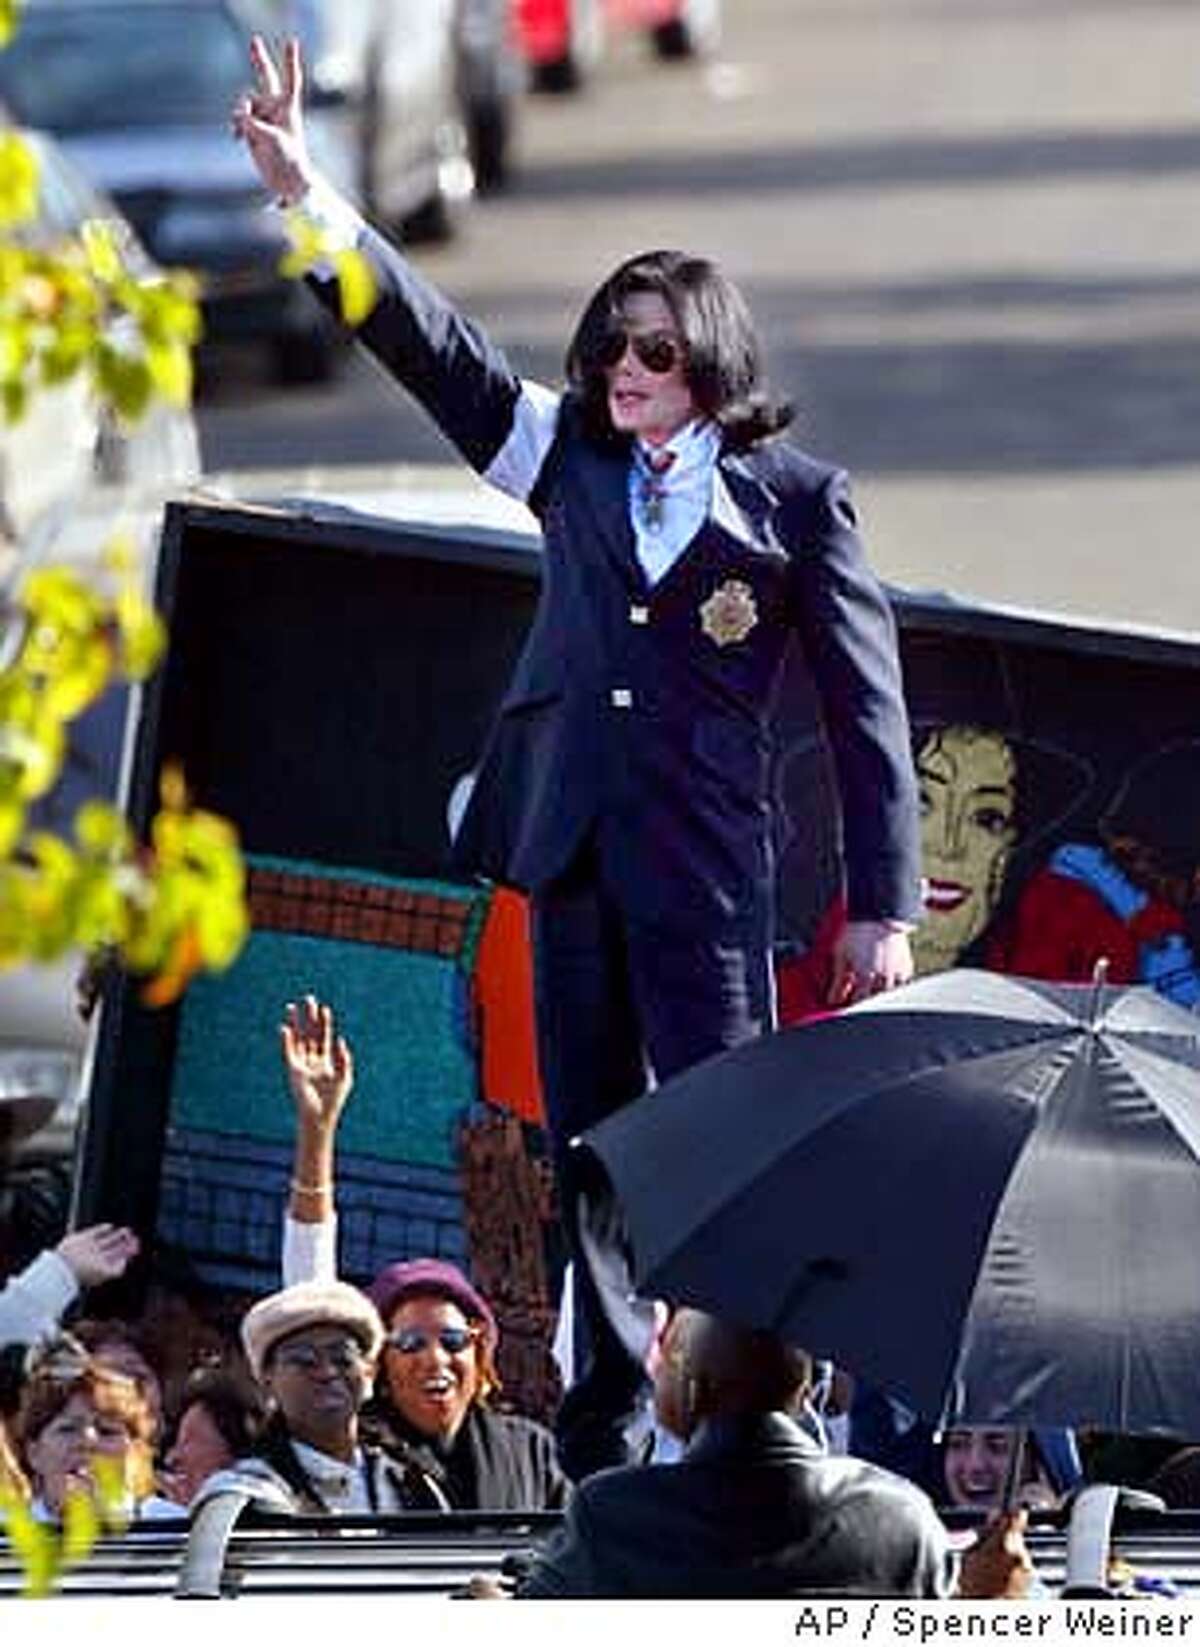 flashes the peace sign to his fans from on top of his limousine as he leaves the courthouse in Santa Maria, Calif., after his arraignment on child molestation charges Friday, Jan. 16, 2004. (AP Photo/Spencer Weiner, pool)